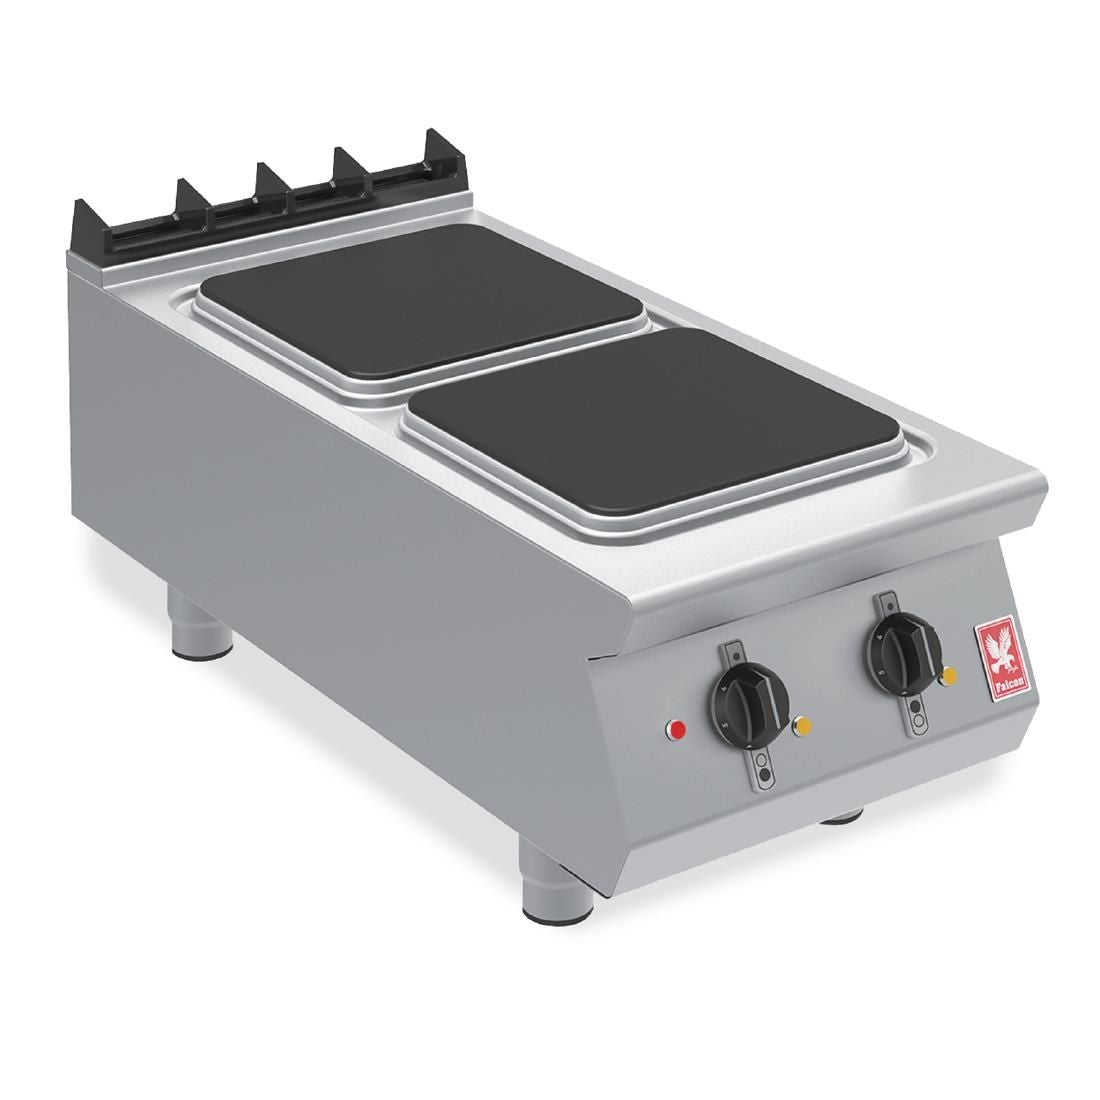 Falcon F900 Two Hotplate Boiling Top E9042 JD Catering Equipment Solutions Ltd